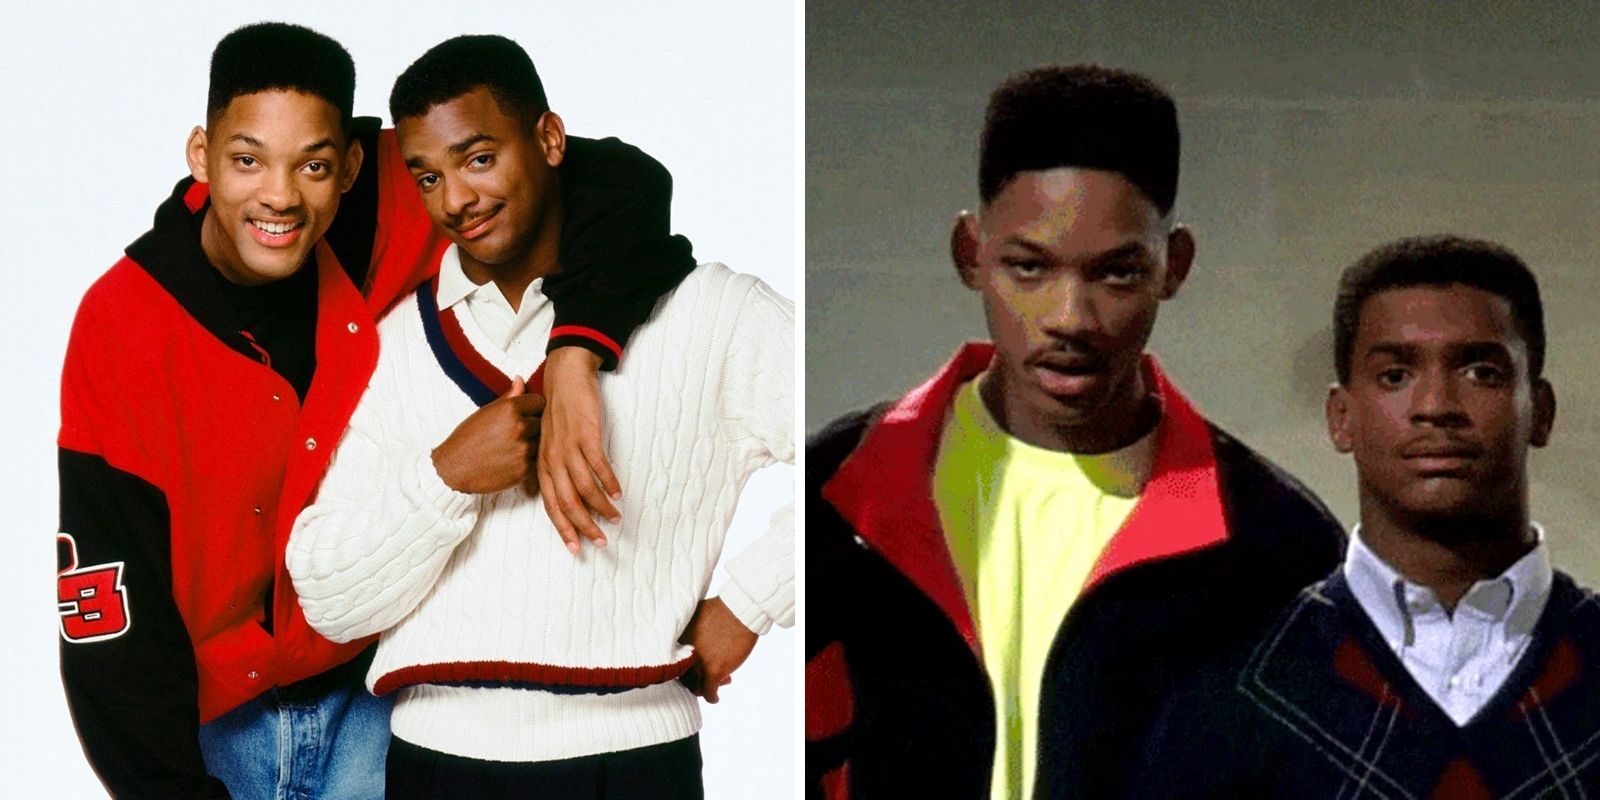 Will Smith and Carlton Banks Friendship Not Friends in The Fresh Prince of Bel Air